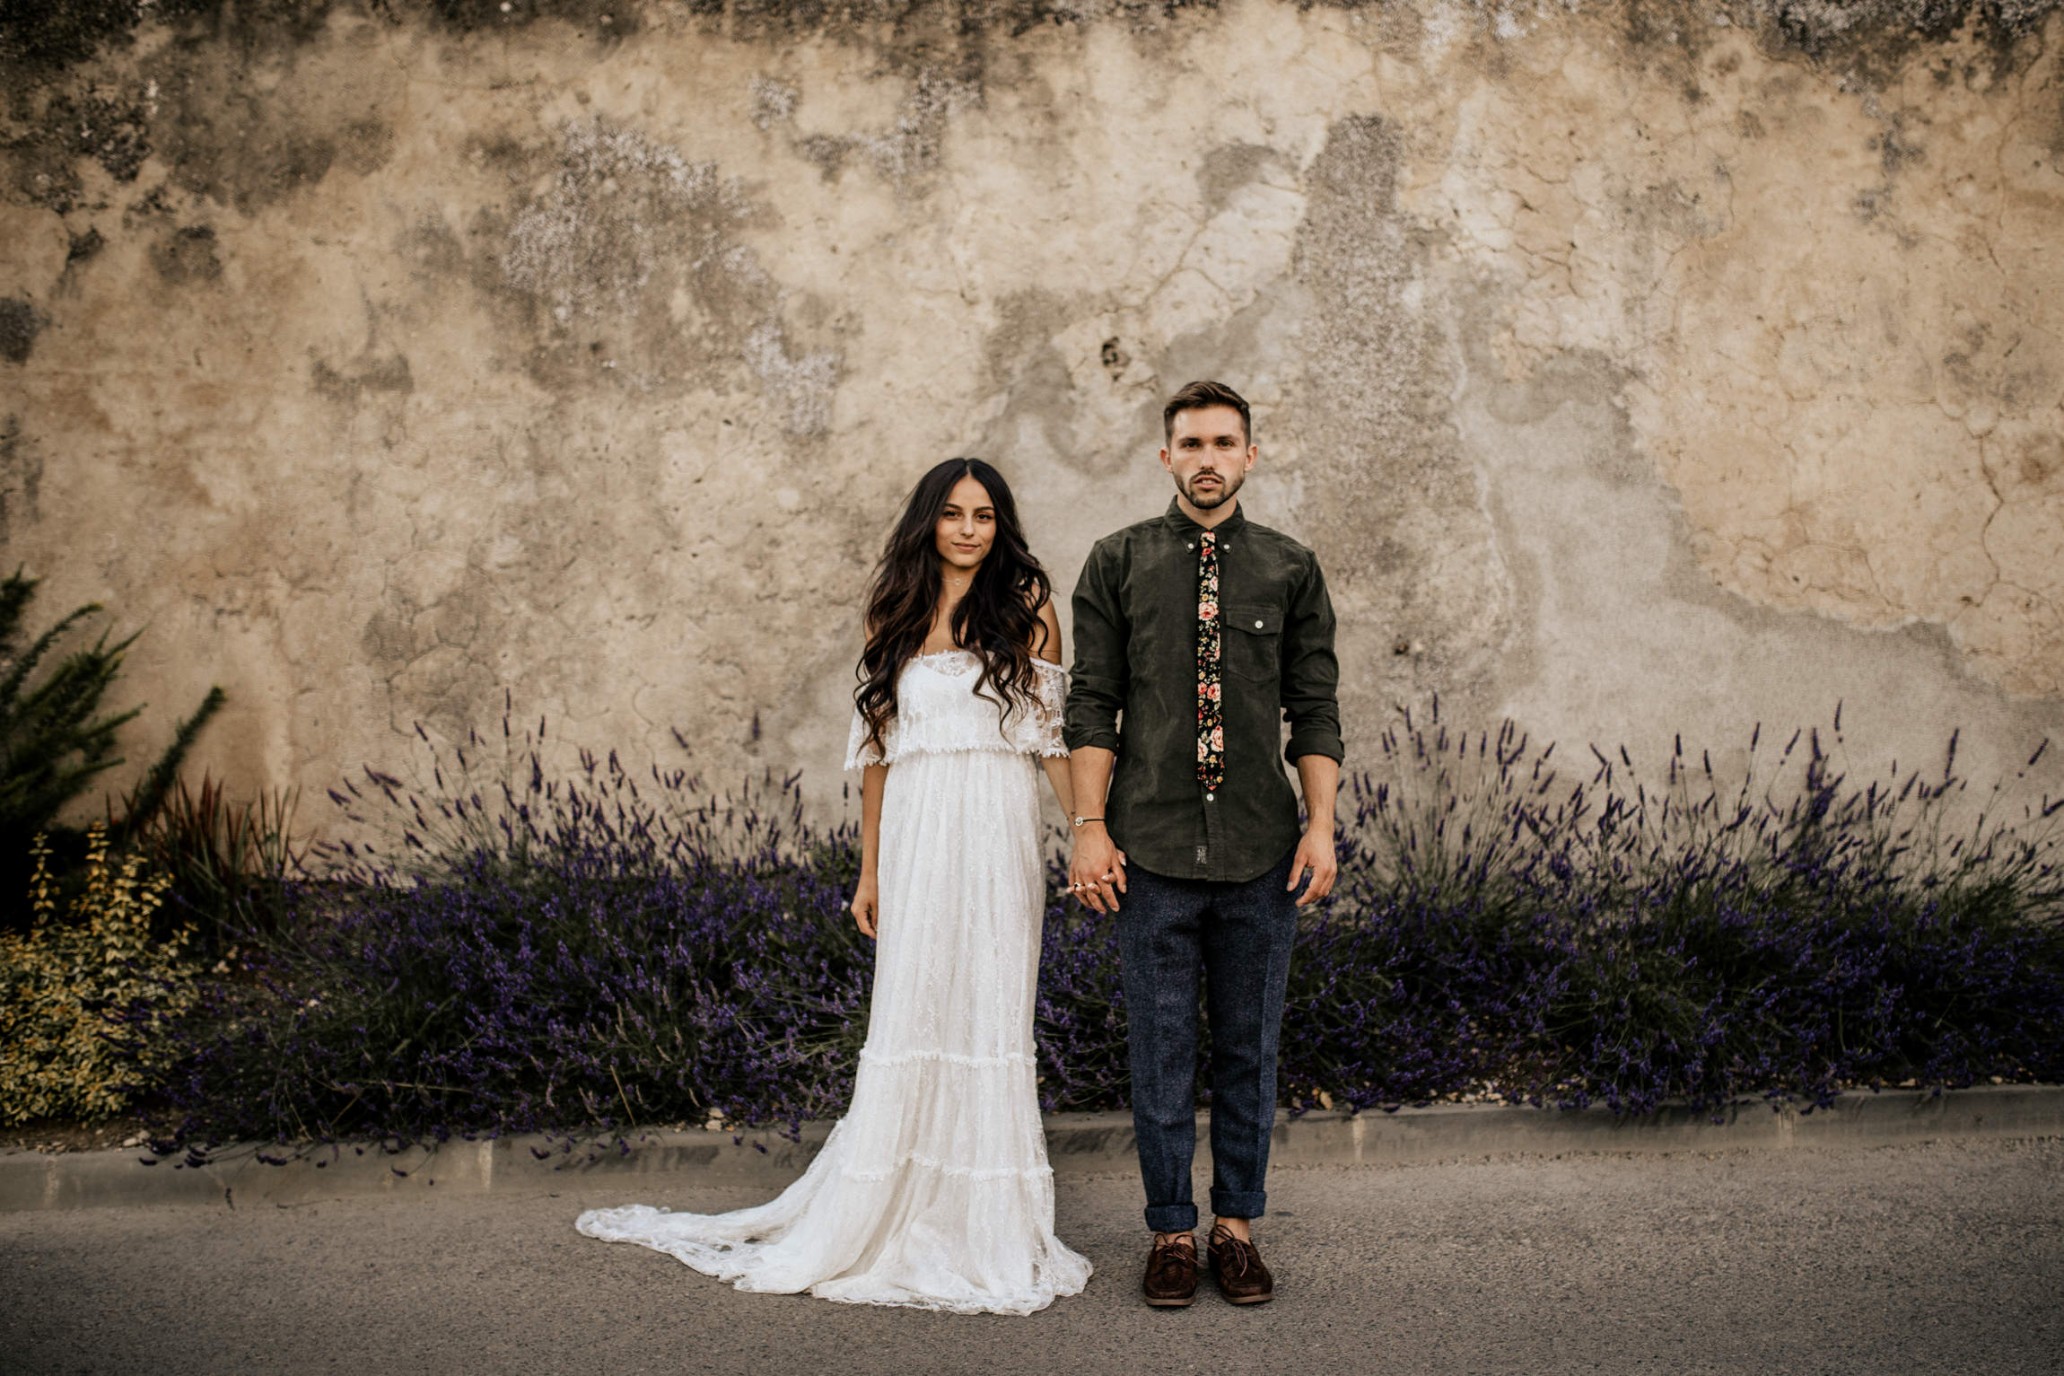 Exquisite Custom Feathered Wedding Dress, Kristelle Boulos Photography